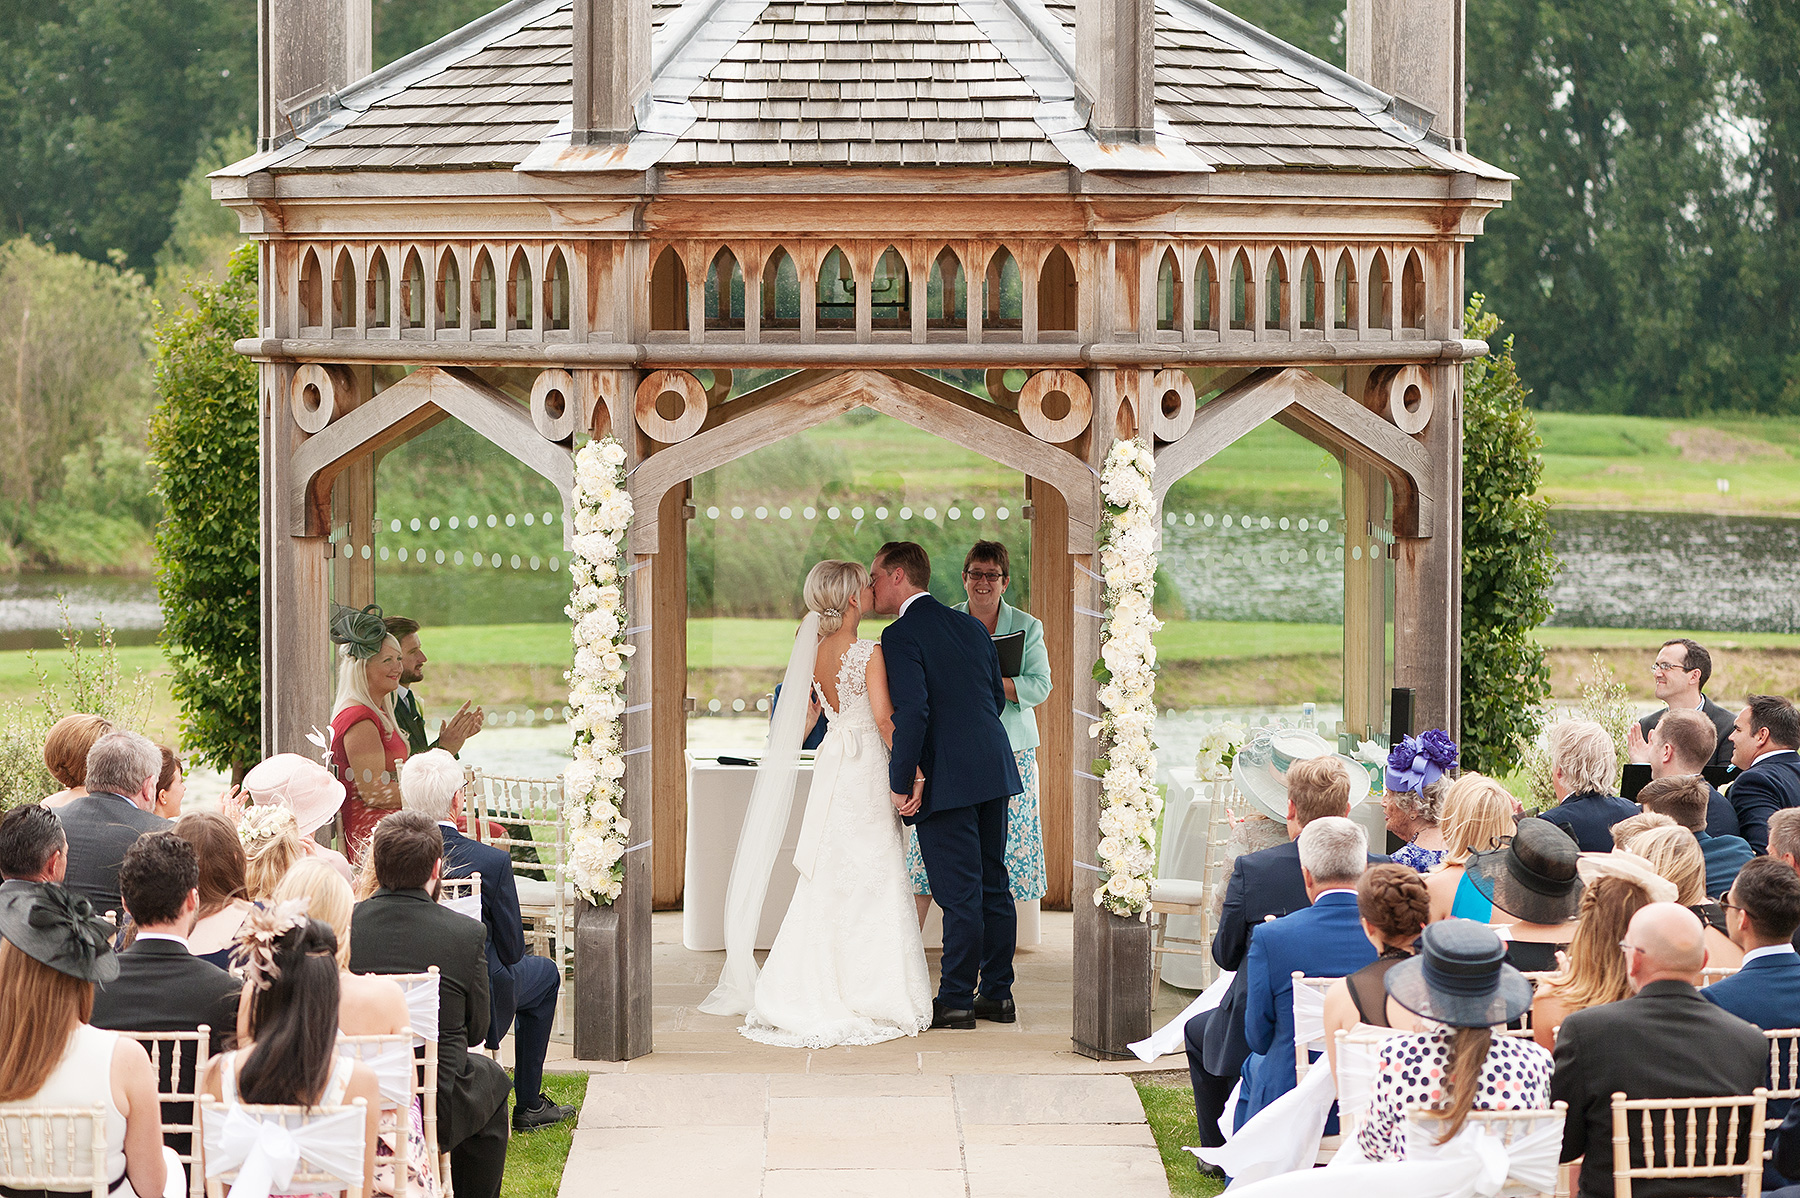 Real Wedding At The Old Hall, Ely - WeddingPlanner.co.uk